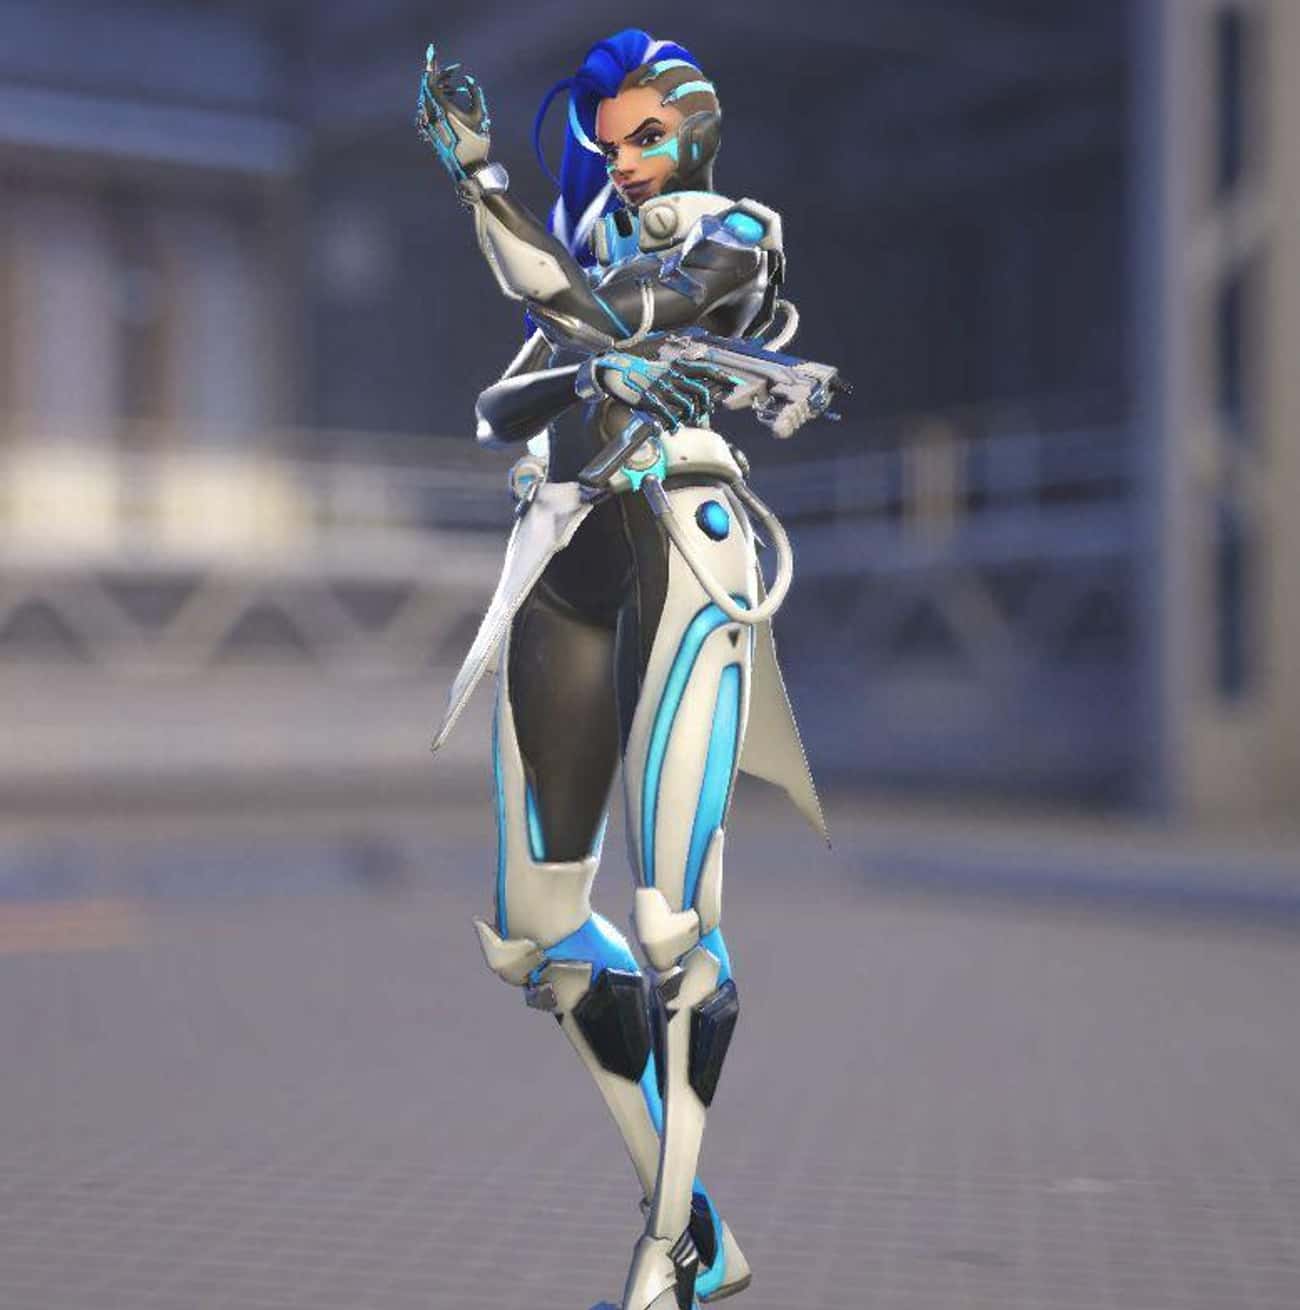 The Best Sombra Skins In The Overwatch Series Ranked